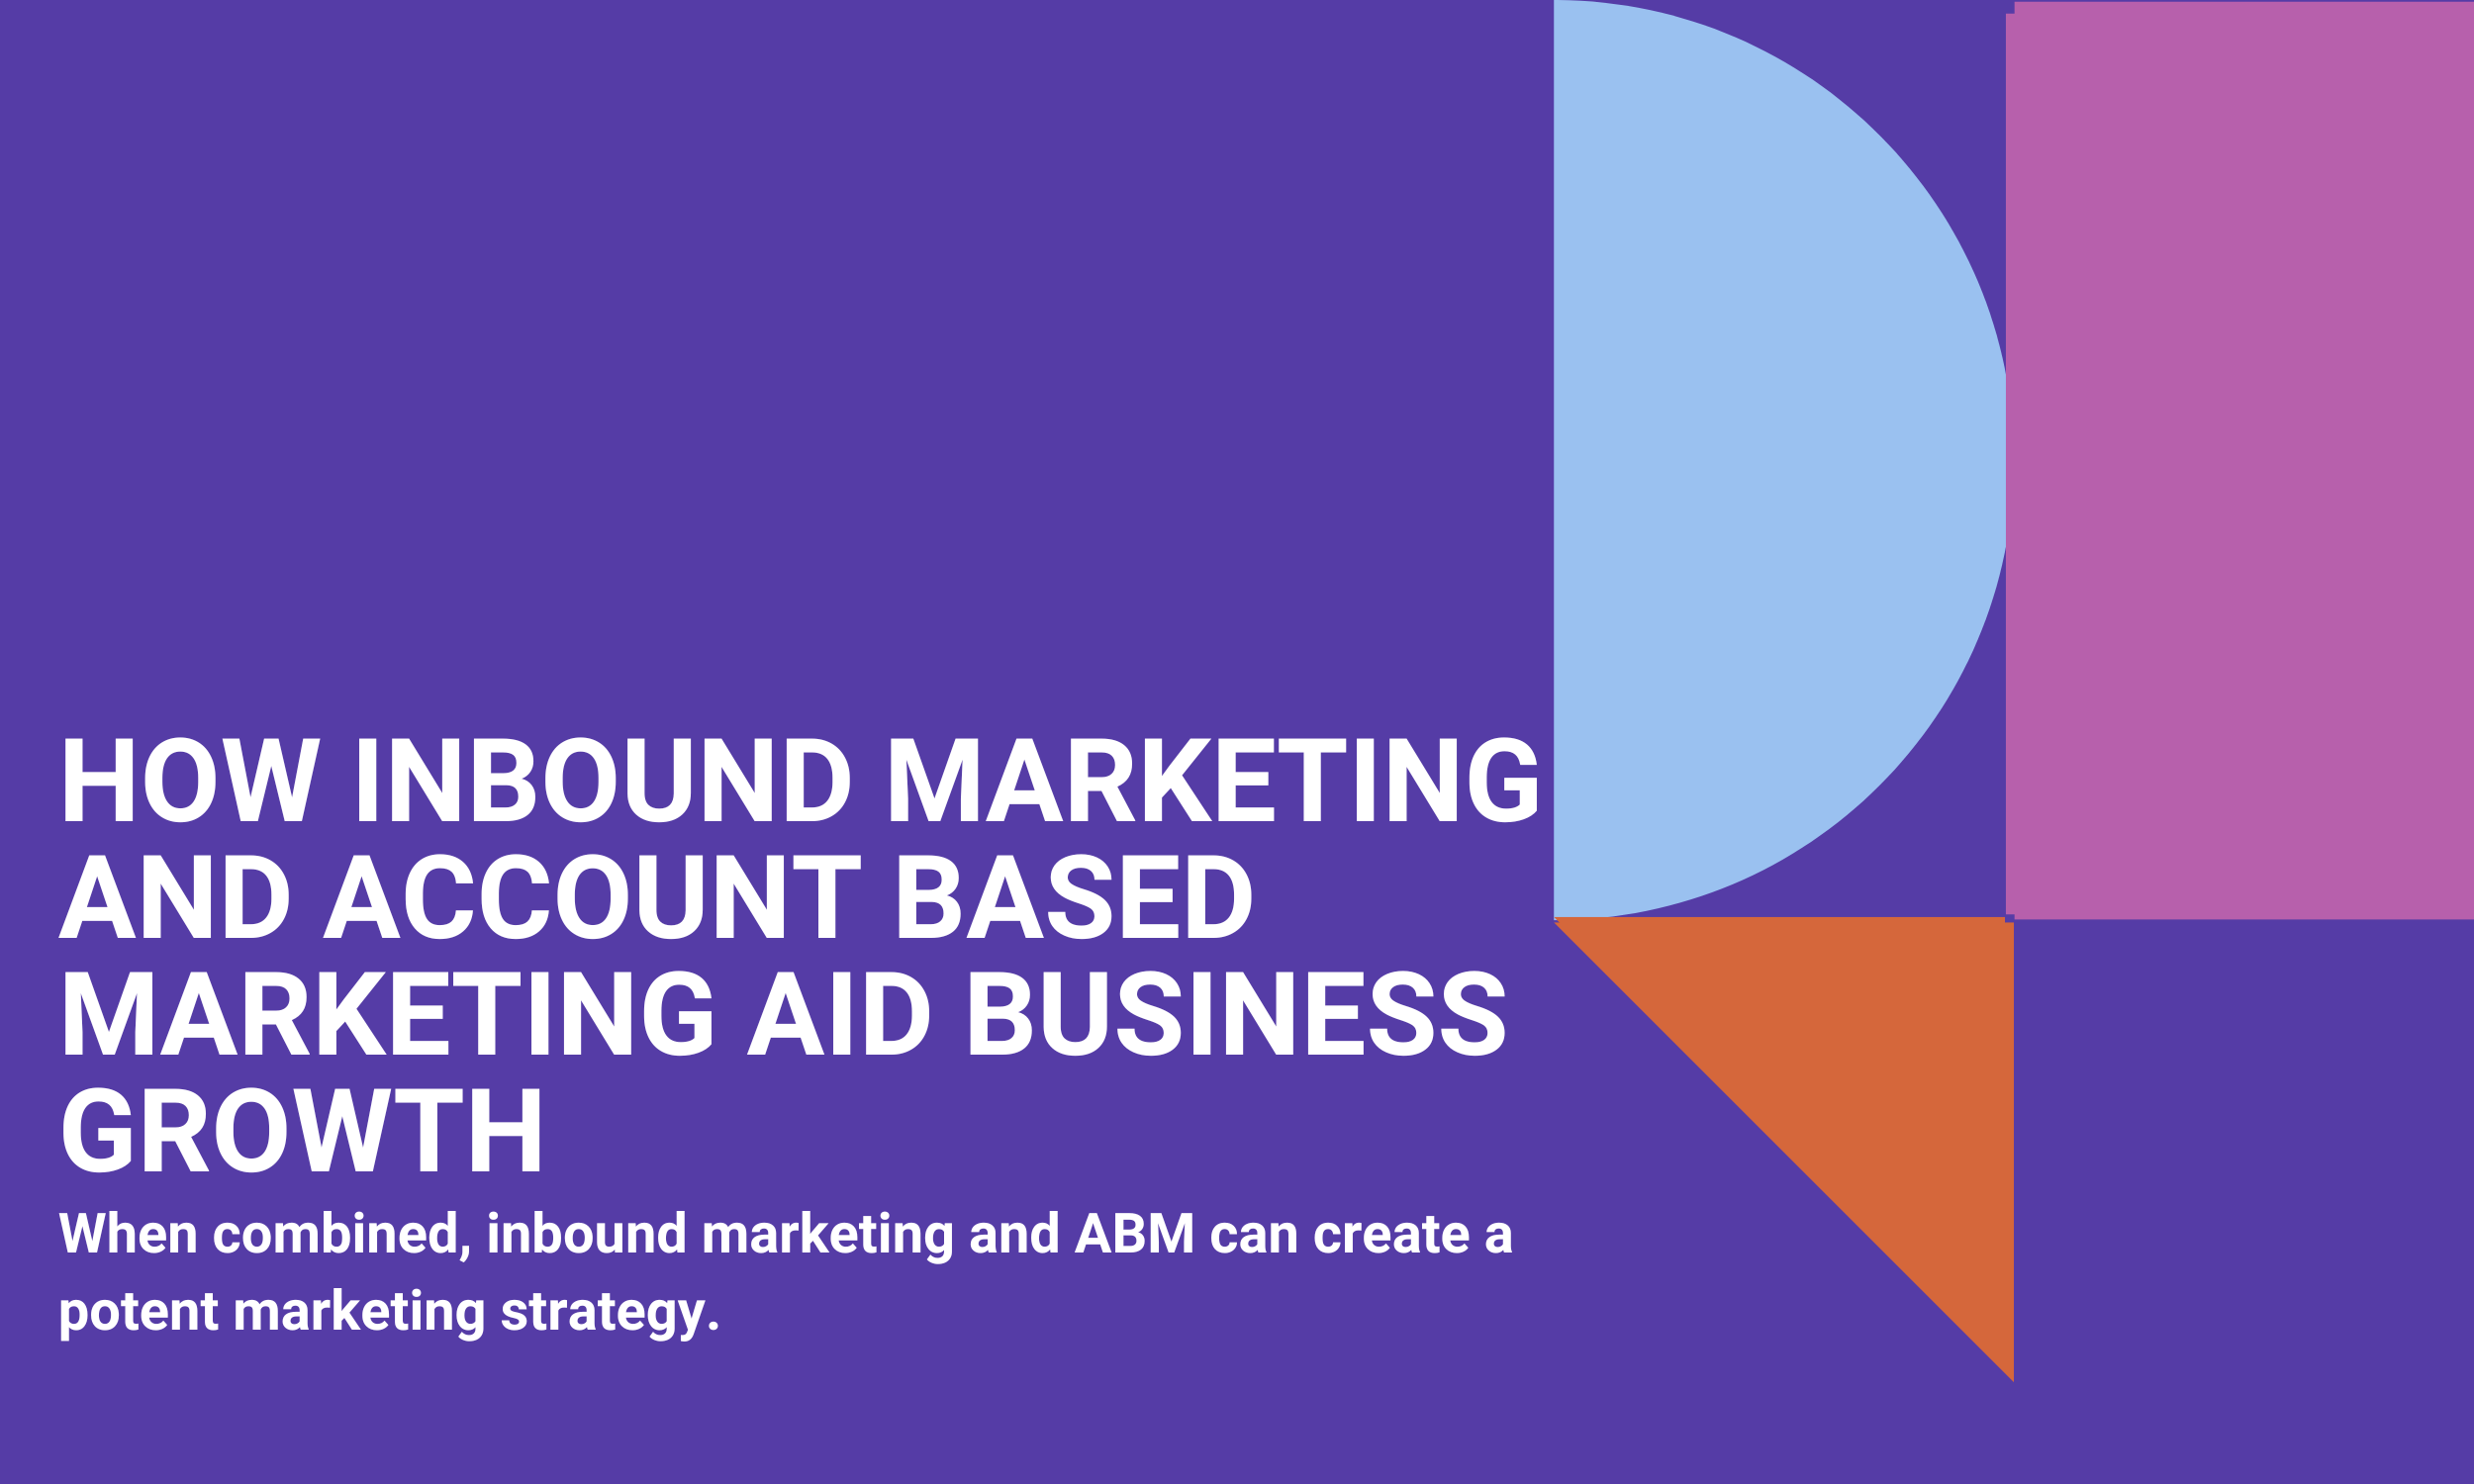 How Inbound Marketing and Account Based Marketing Aid Business Growth